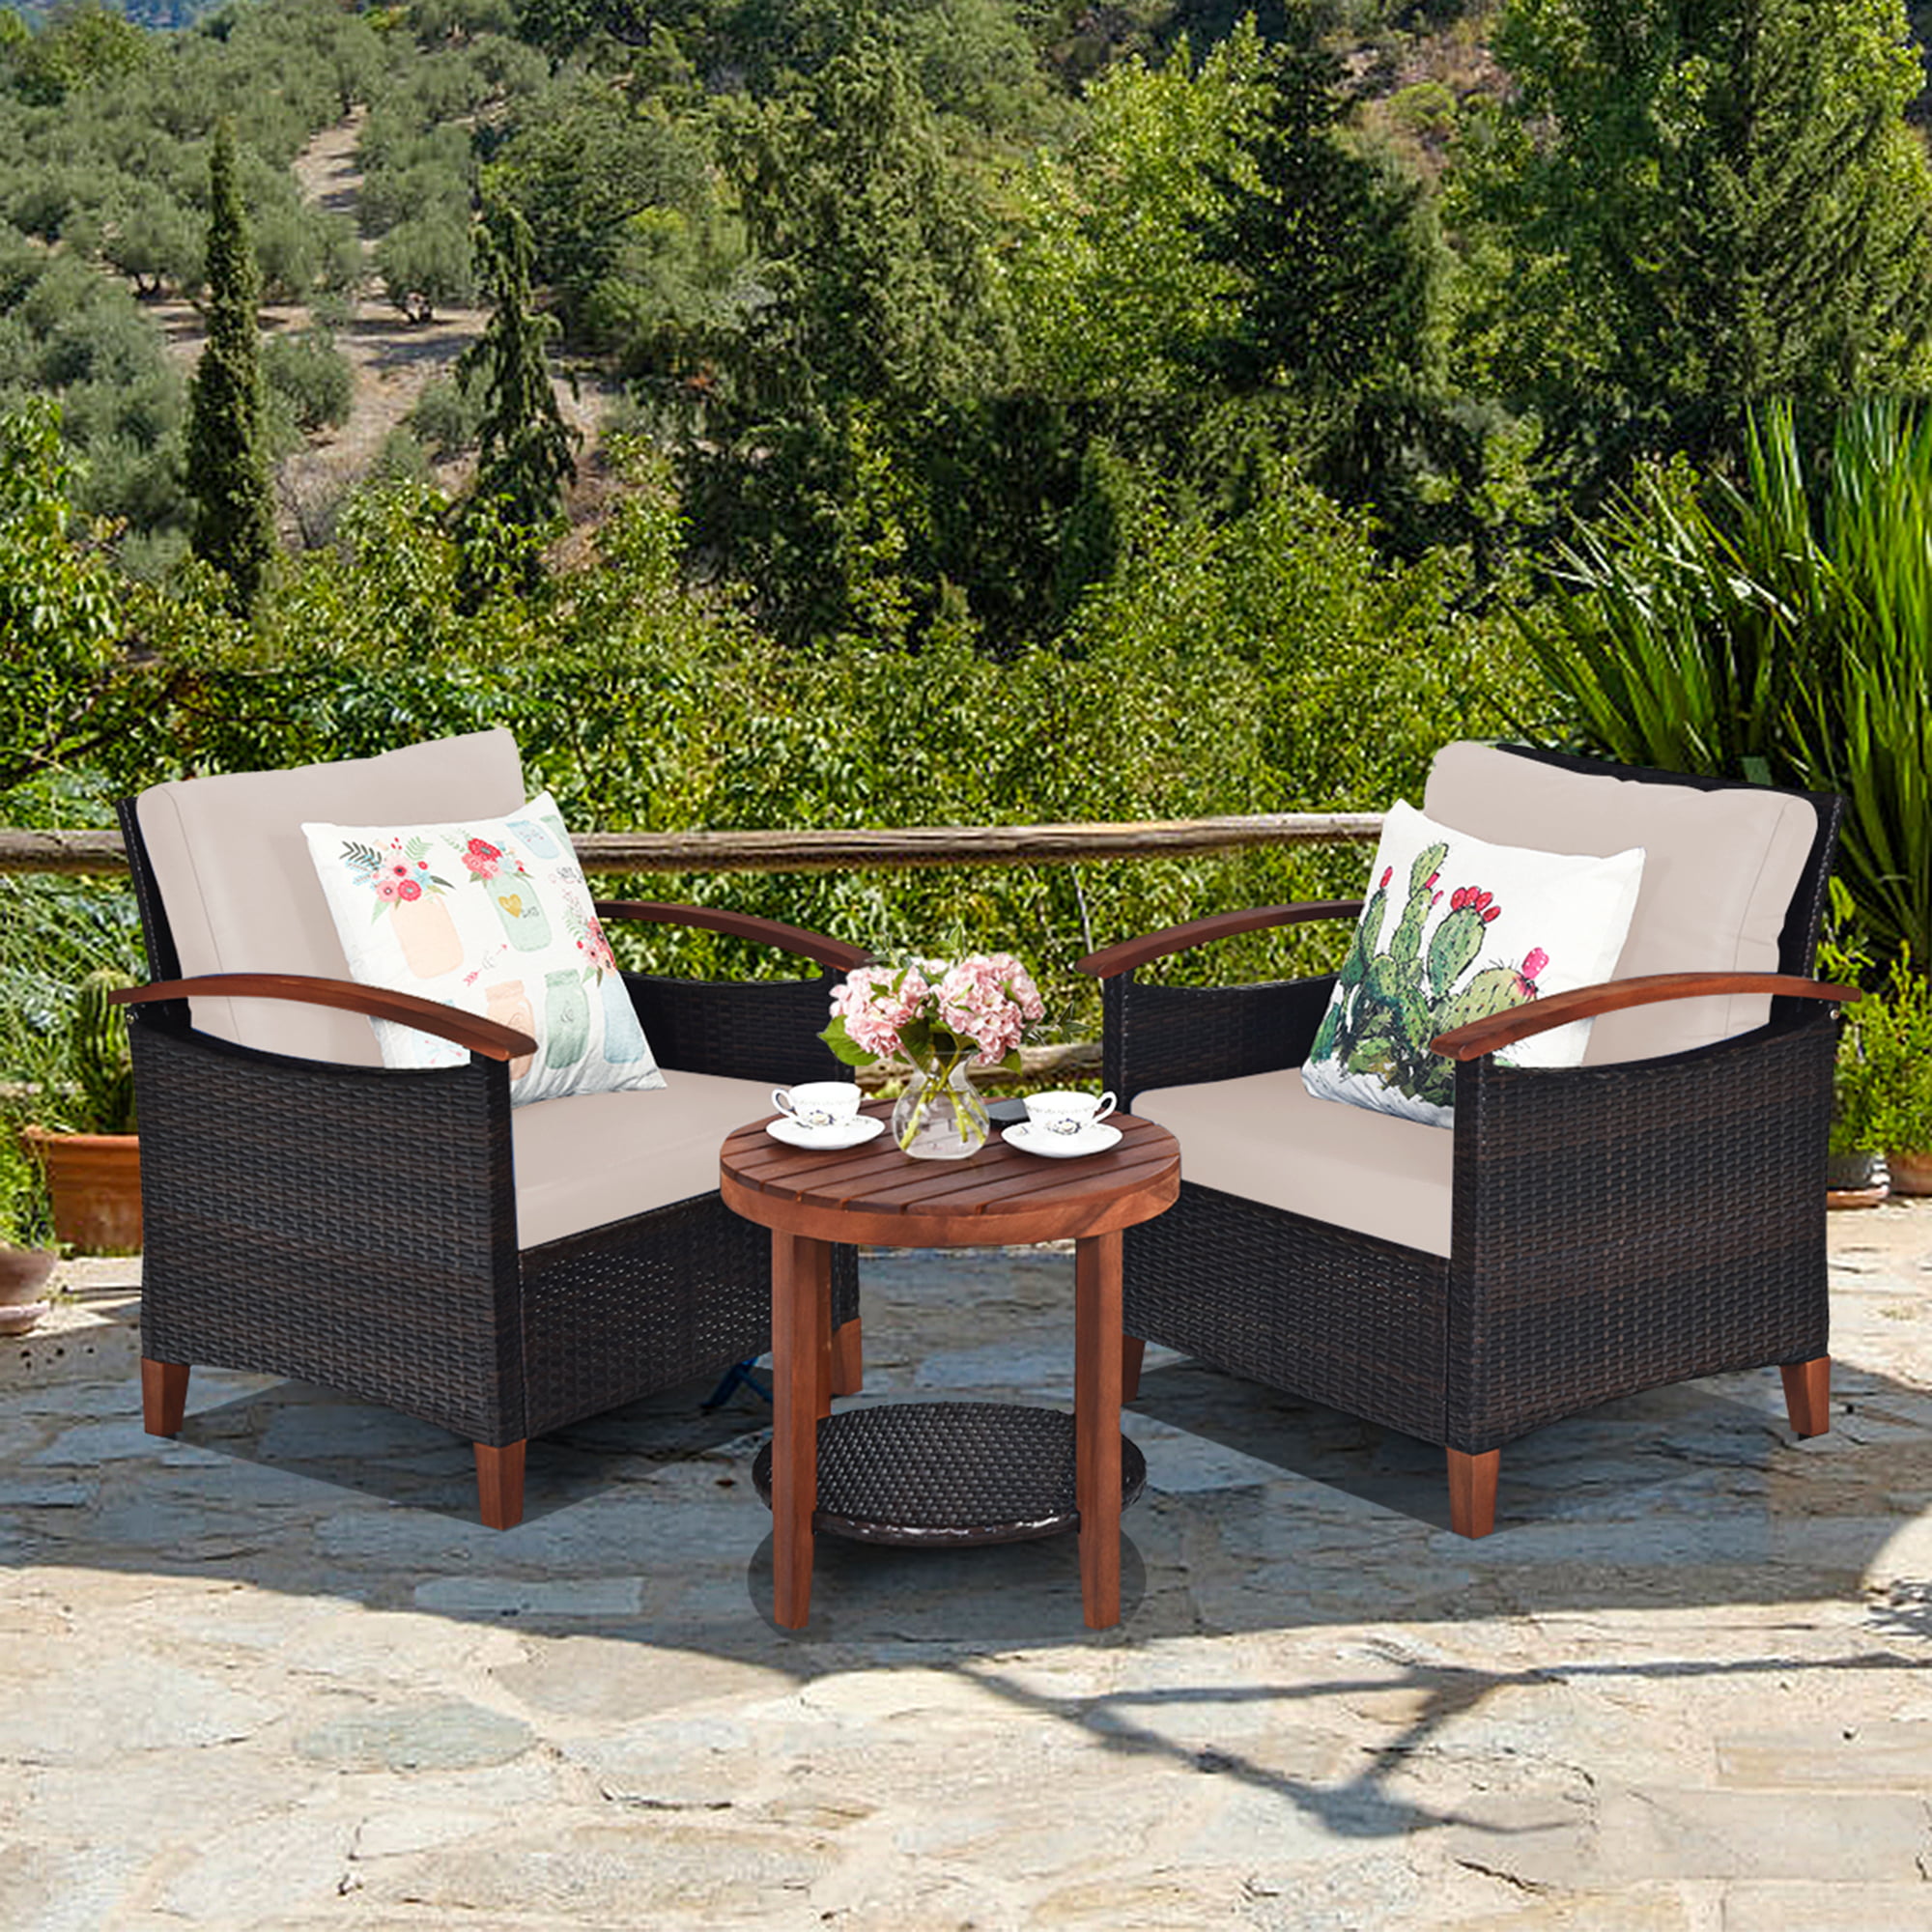 Gymax 3 Pieces Patio Wicker Rattan, Jcpenney Outdoor Furniture Cushions